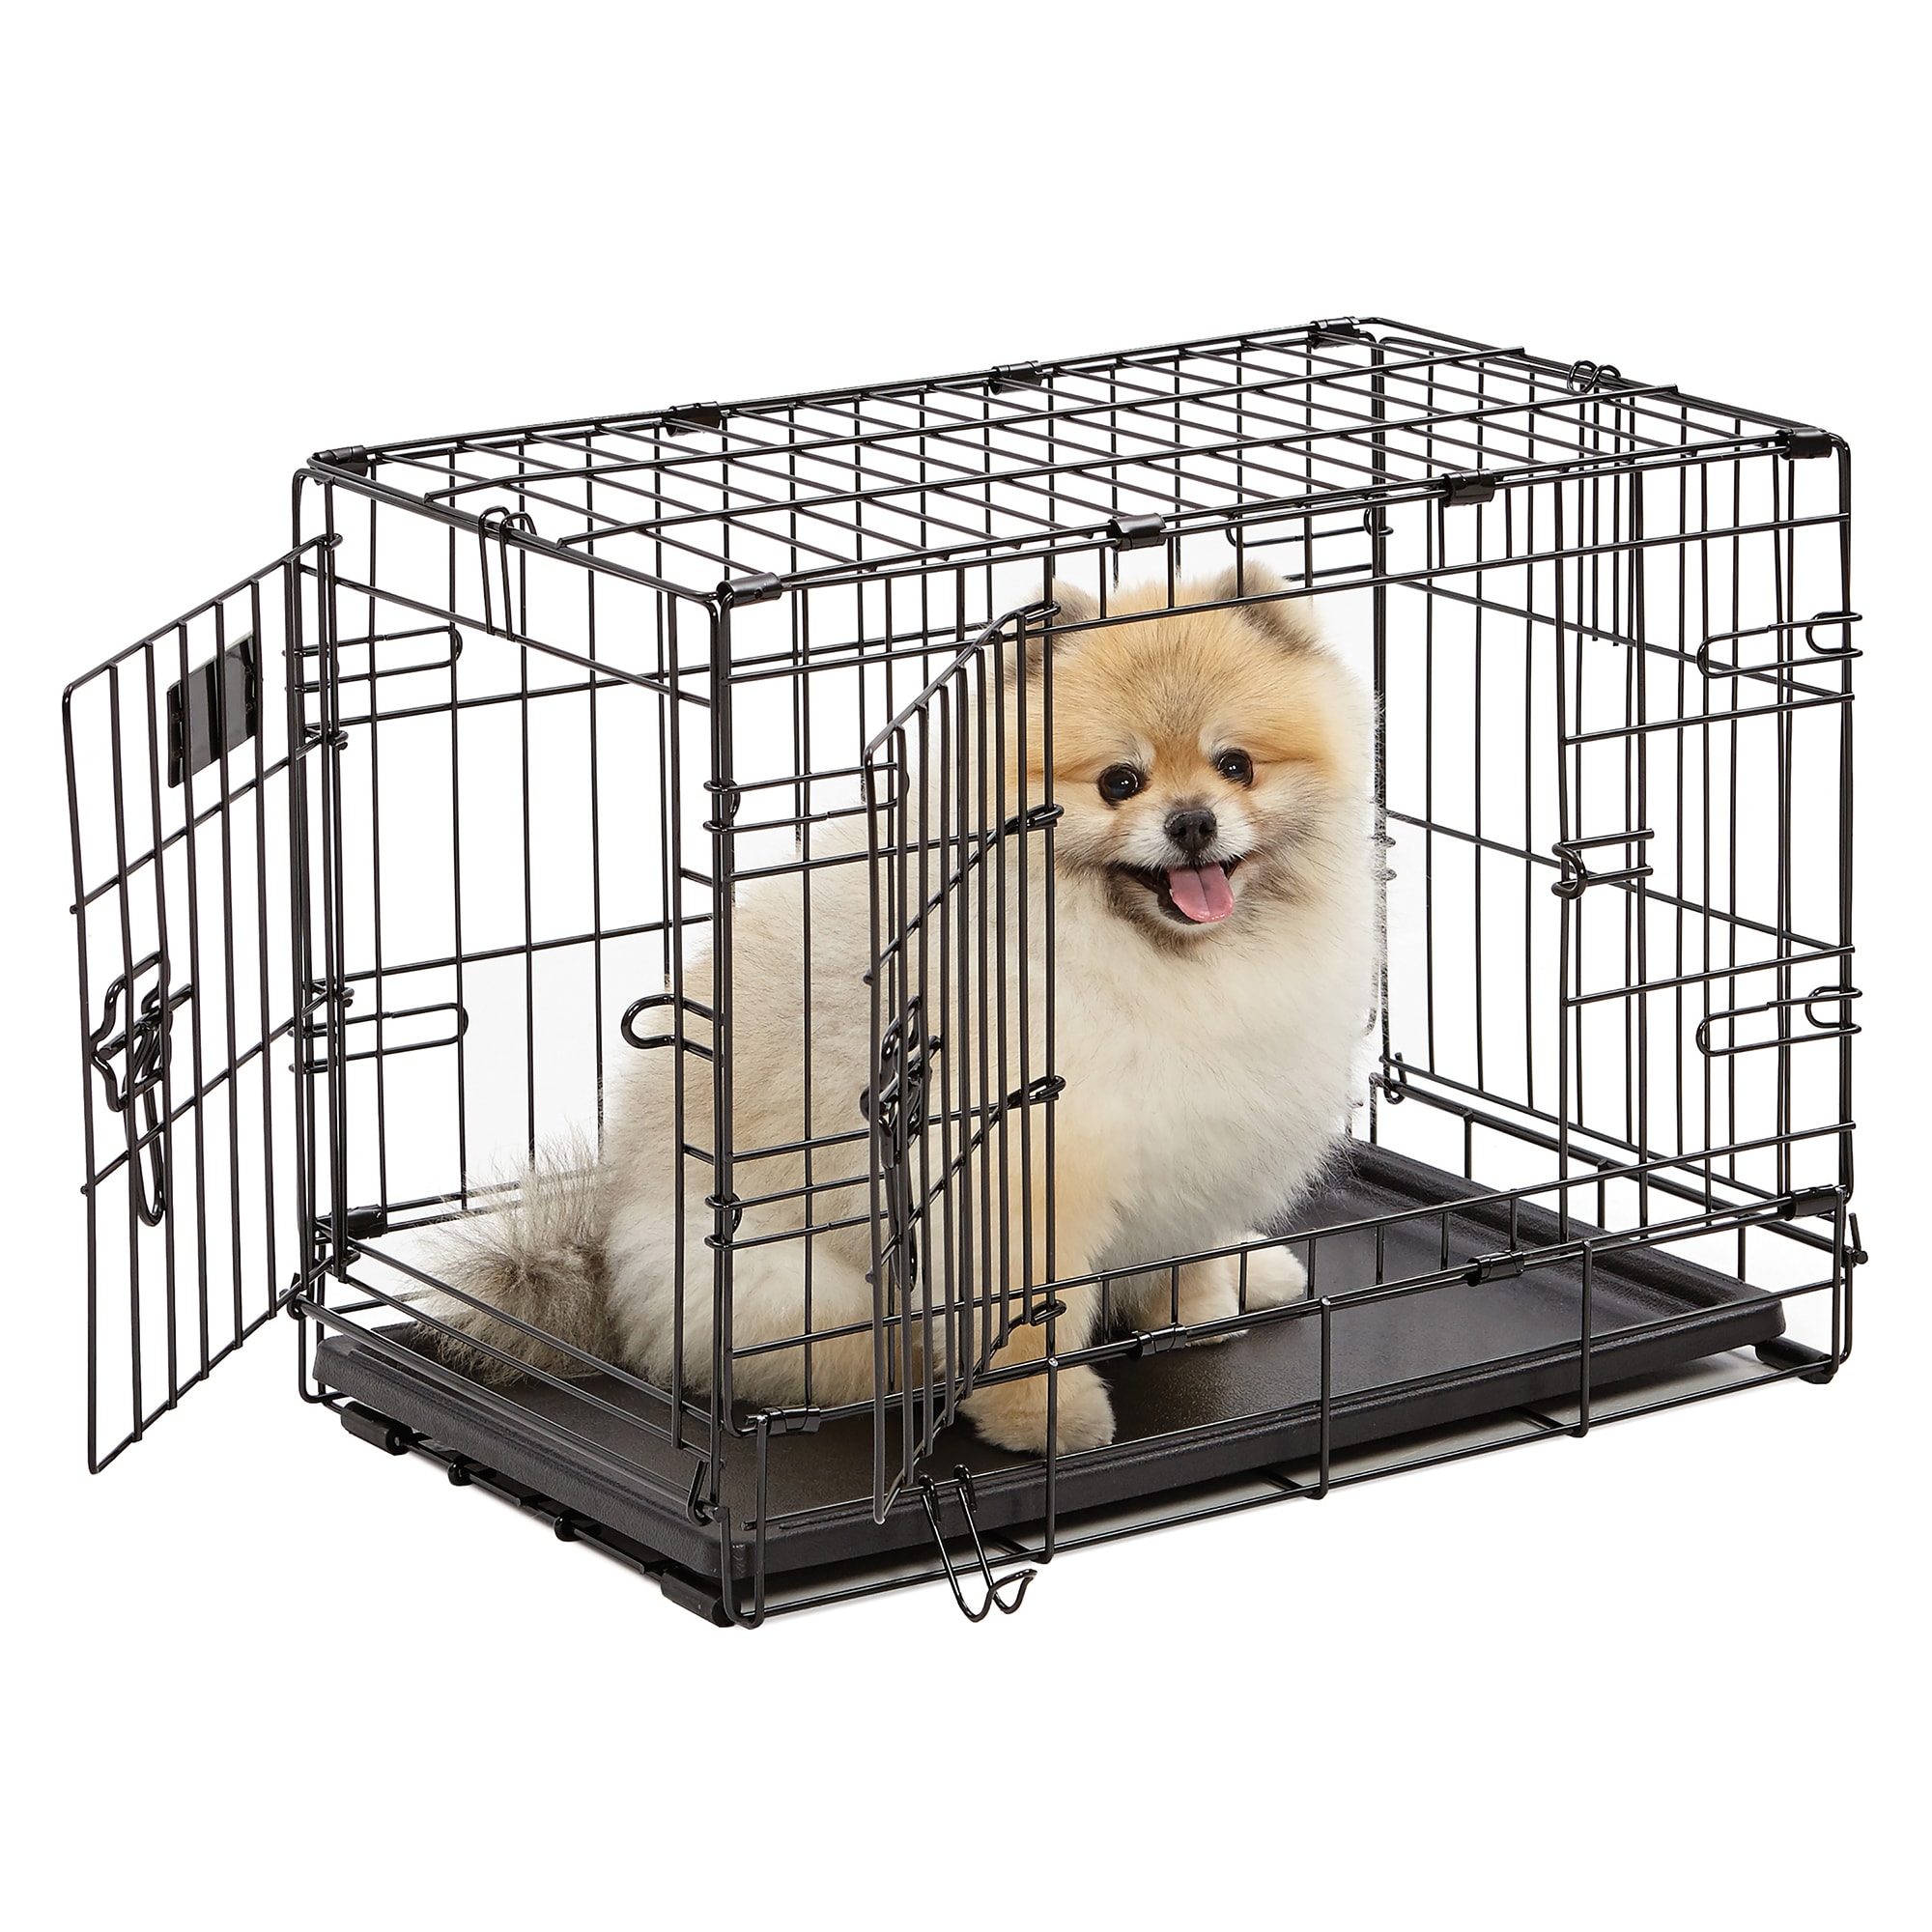 Midwest iCrate Double Door Folding Dog Crate, 36" L X 23" W X 25